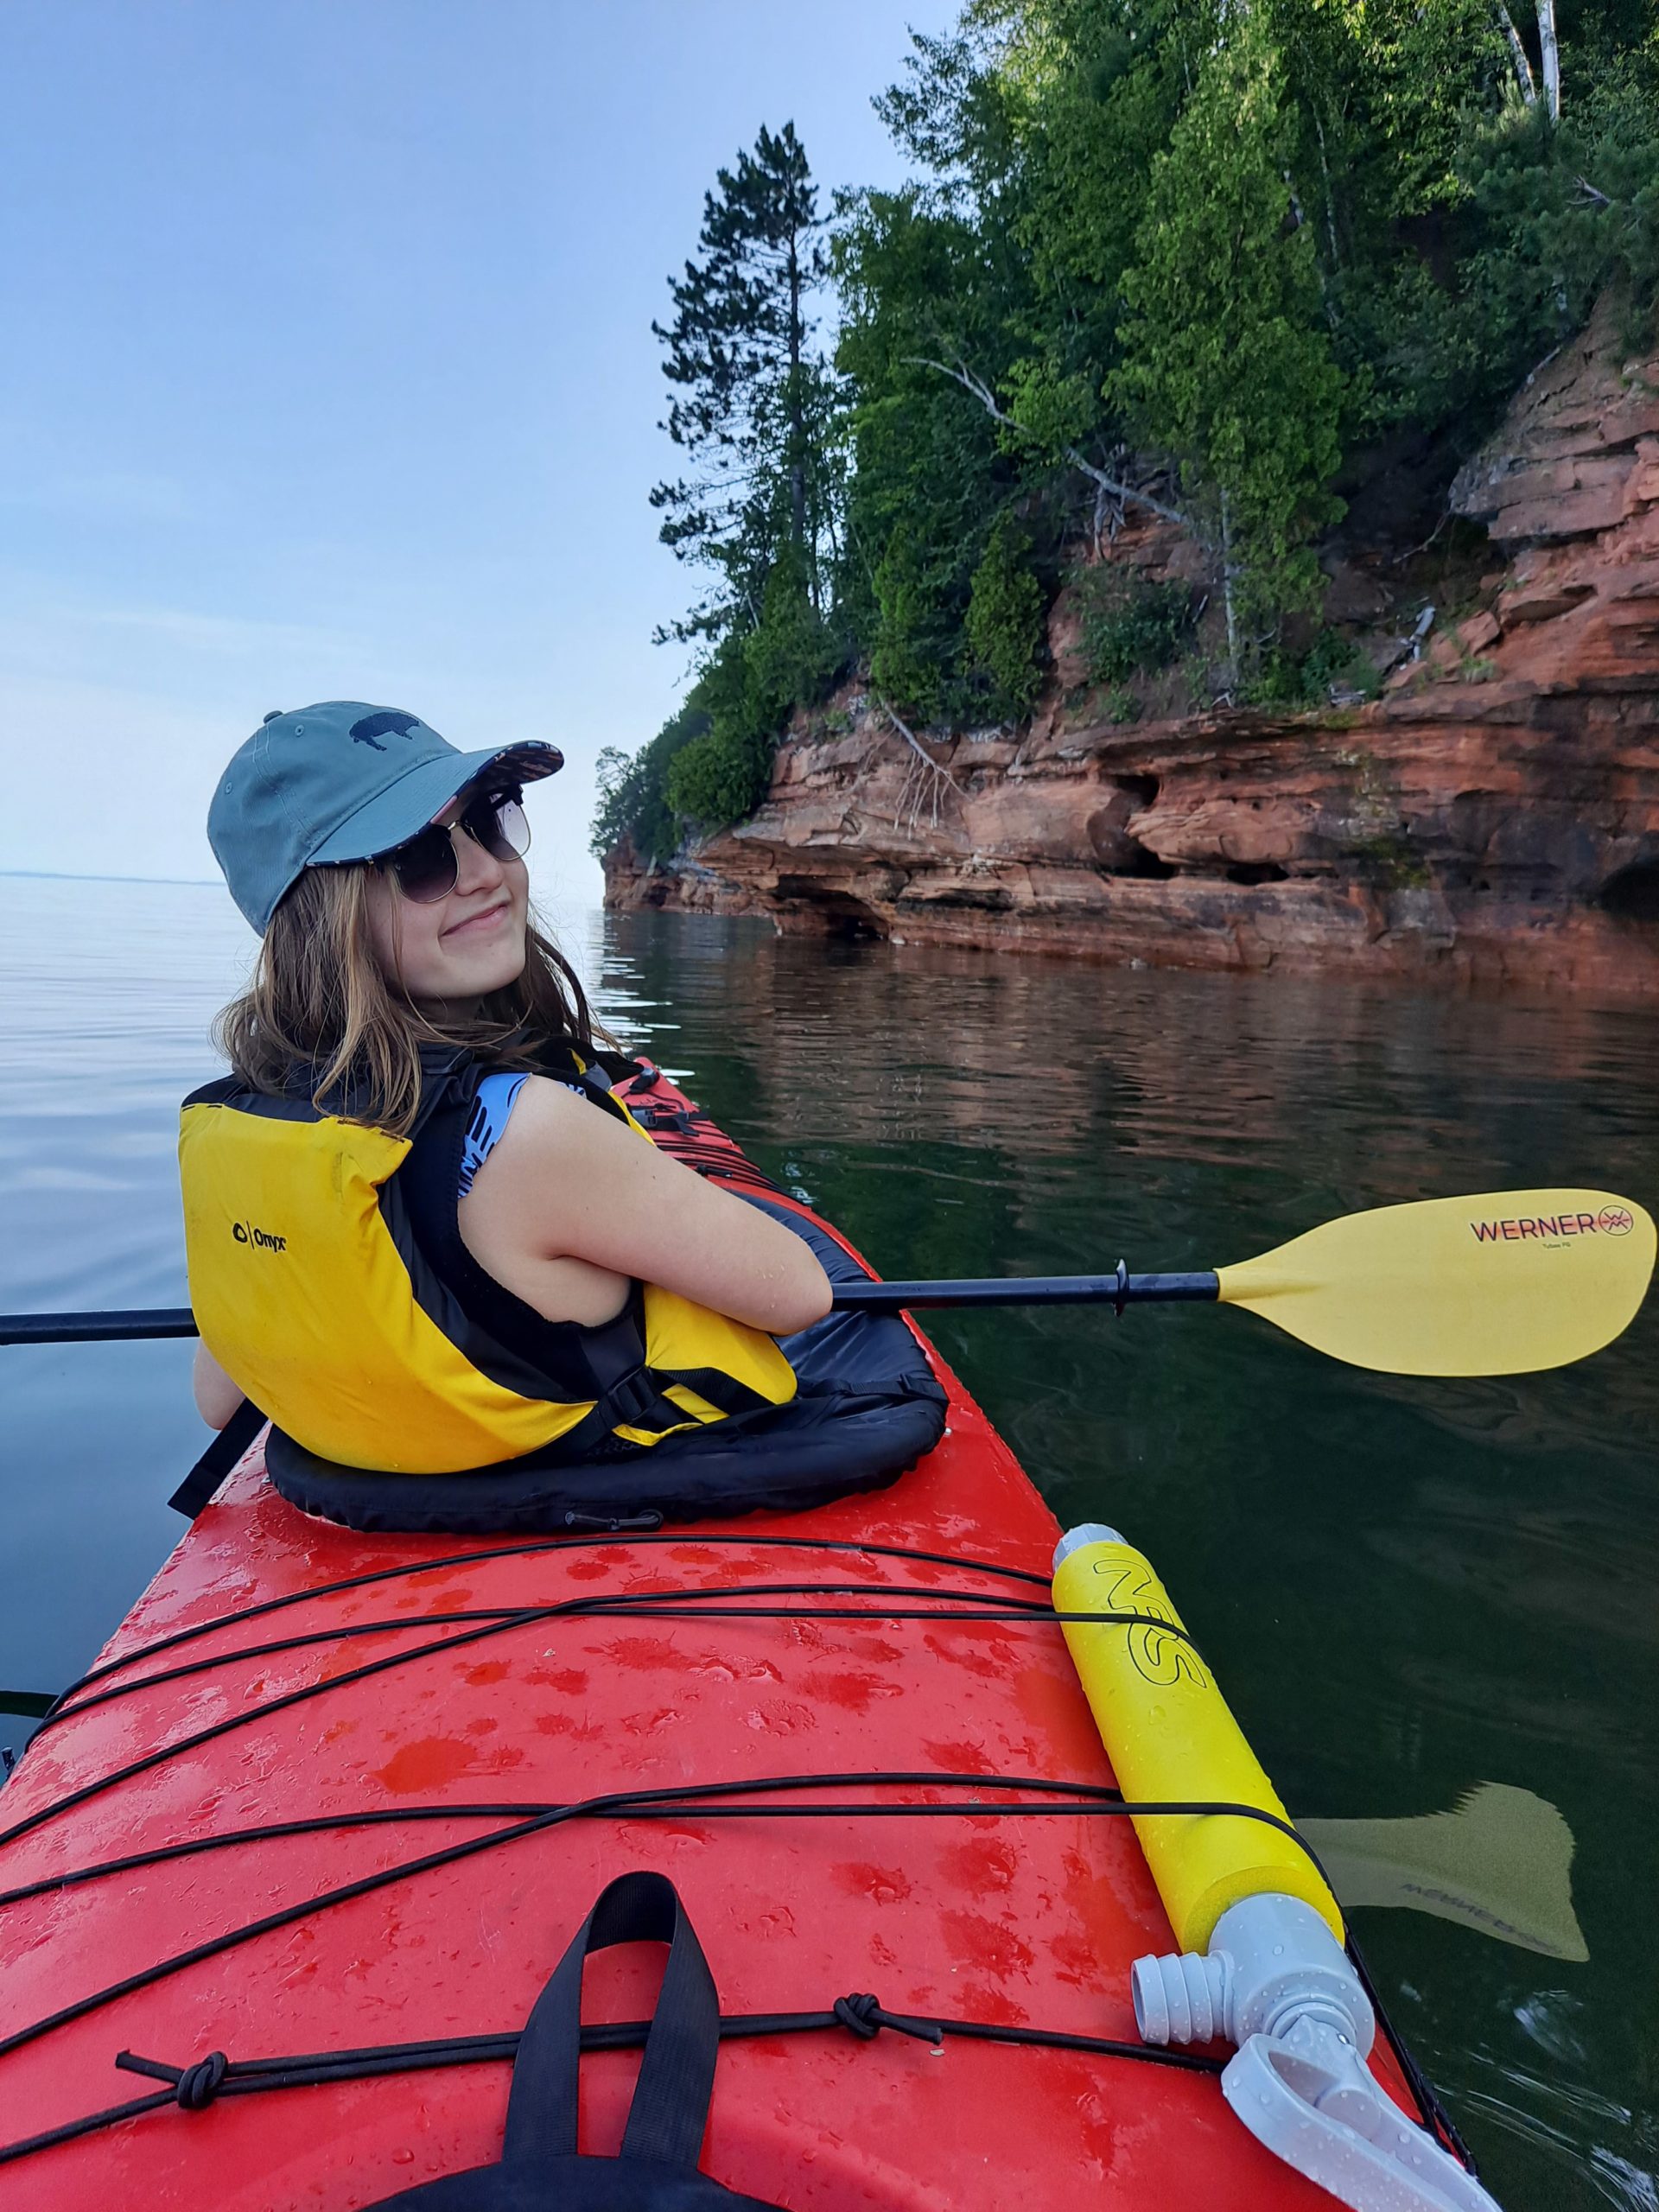 Michele, who is a cochlear implant recipient with progressive hearing loss, kayaking